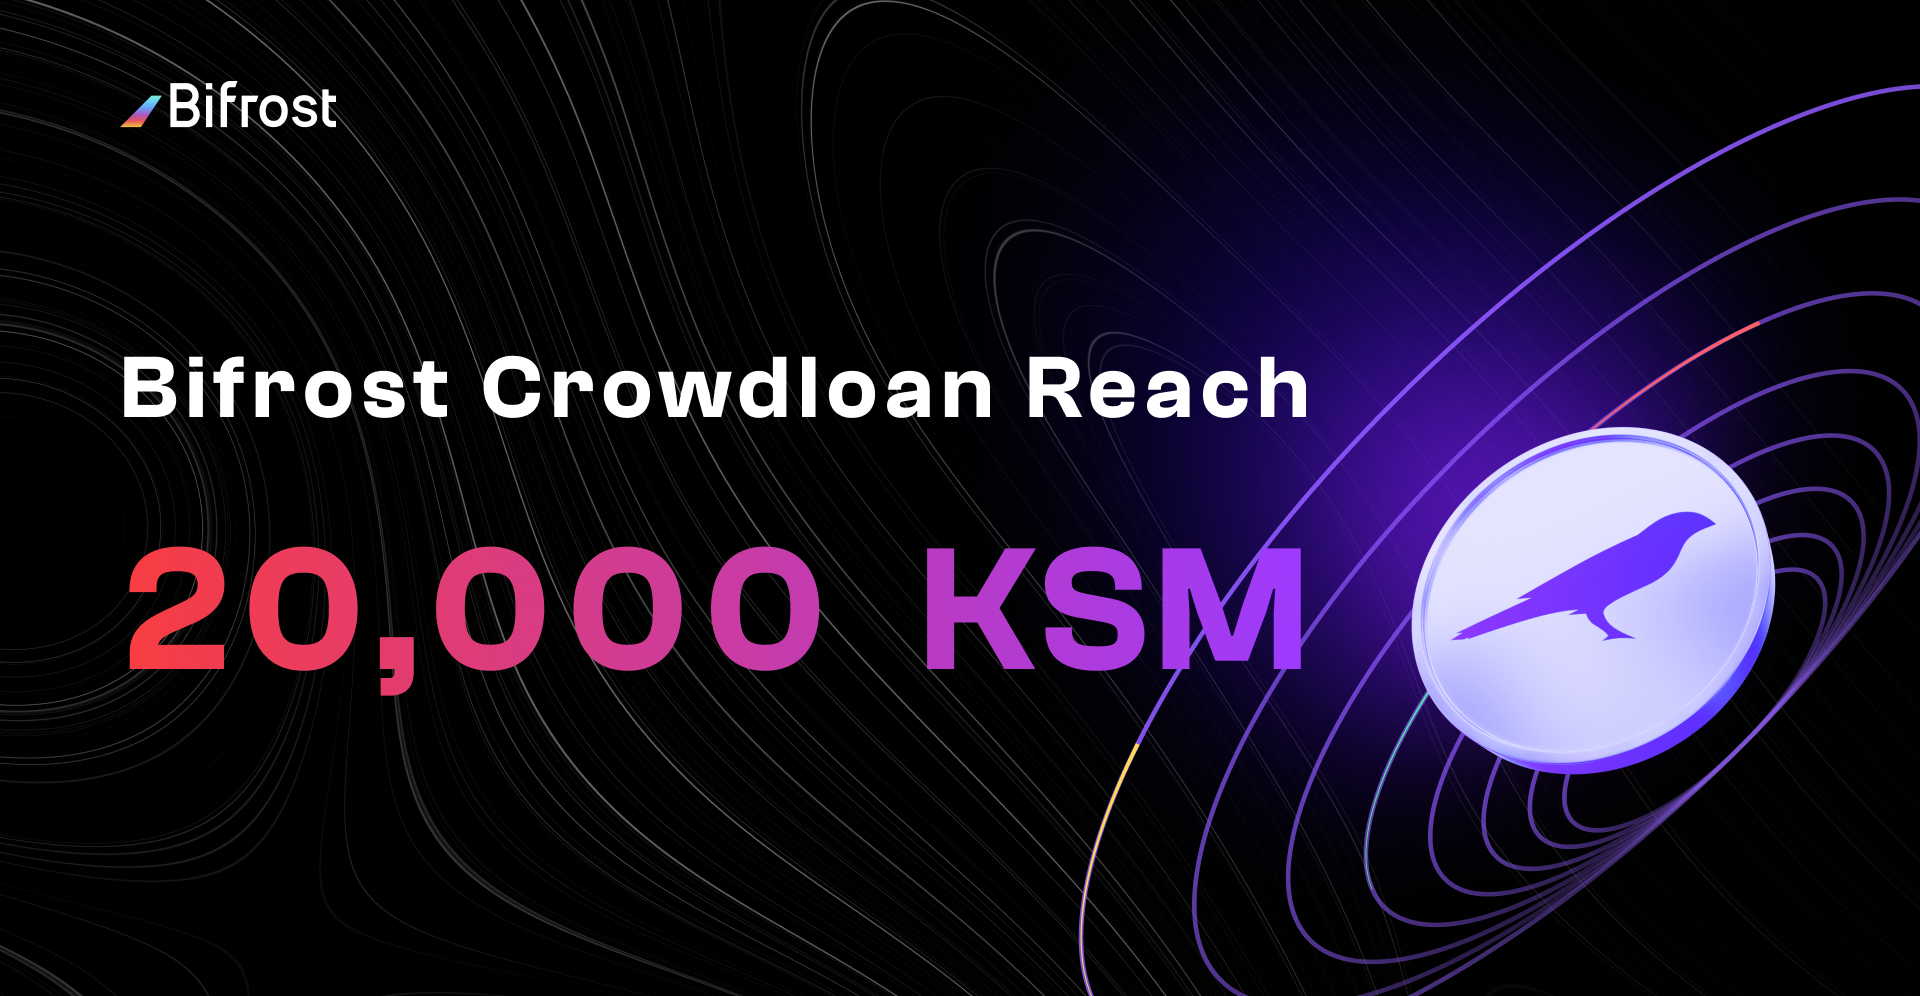 Over 20,000 KSMs have been successfully voted to Bifrost Crowdloan, Weekly Report 58